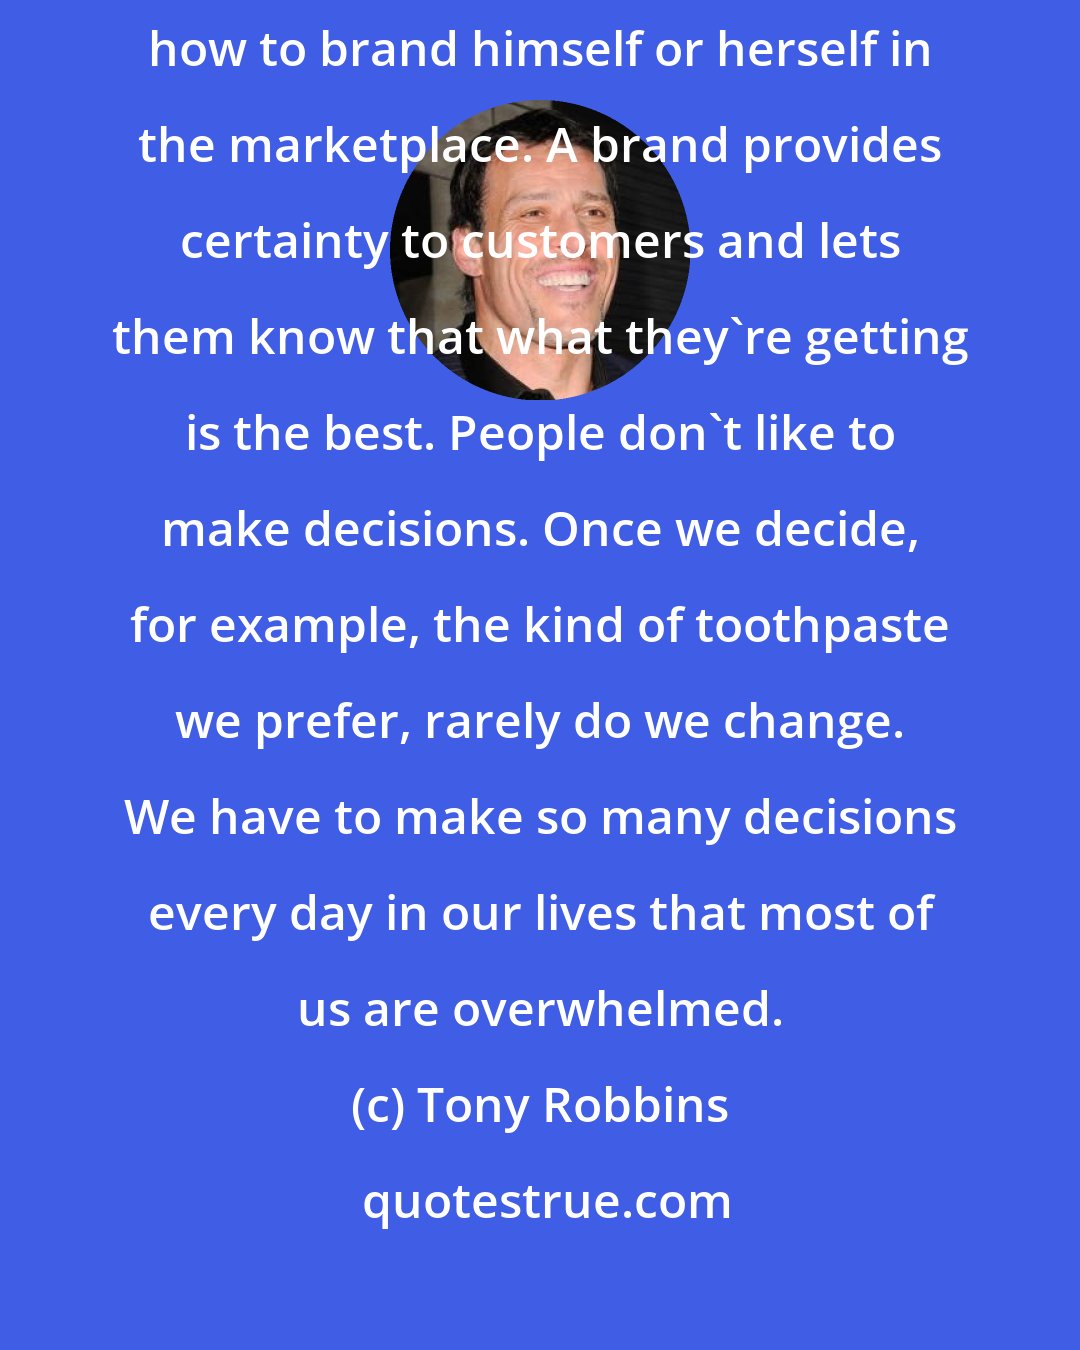 Tony Robbins: If there is any one skill that every professional must learn, it is how to brand himself or herself in the marketplace. A brand provides certainty to customers and lets them know that what they`re getting is the best. People don`t like to make decisions. Once we decide, for example, the kind of toothpaste we prefer, rarely do we change. We have to make so many decisions every day in our lives that most of us are overwhelmed.